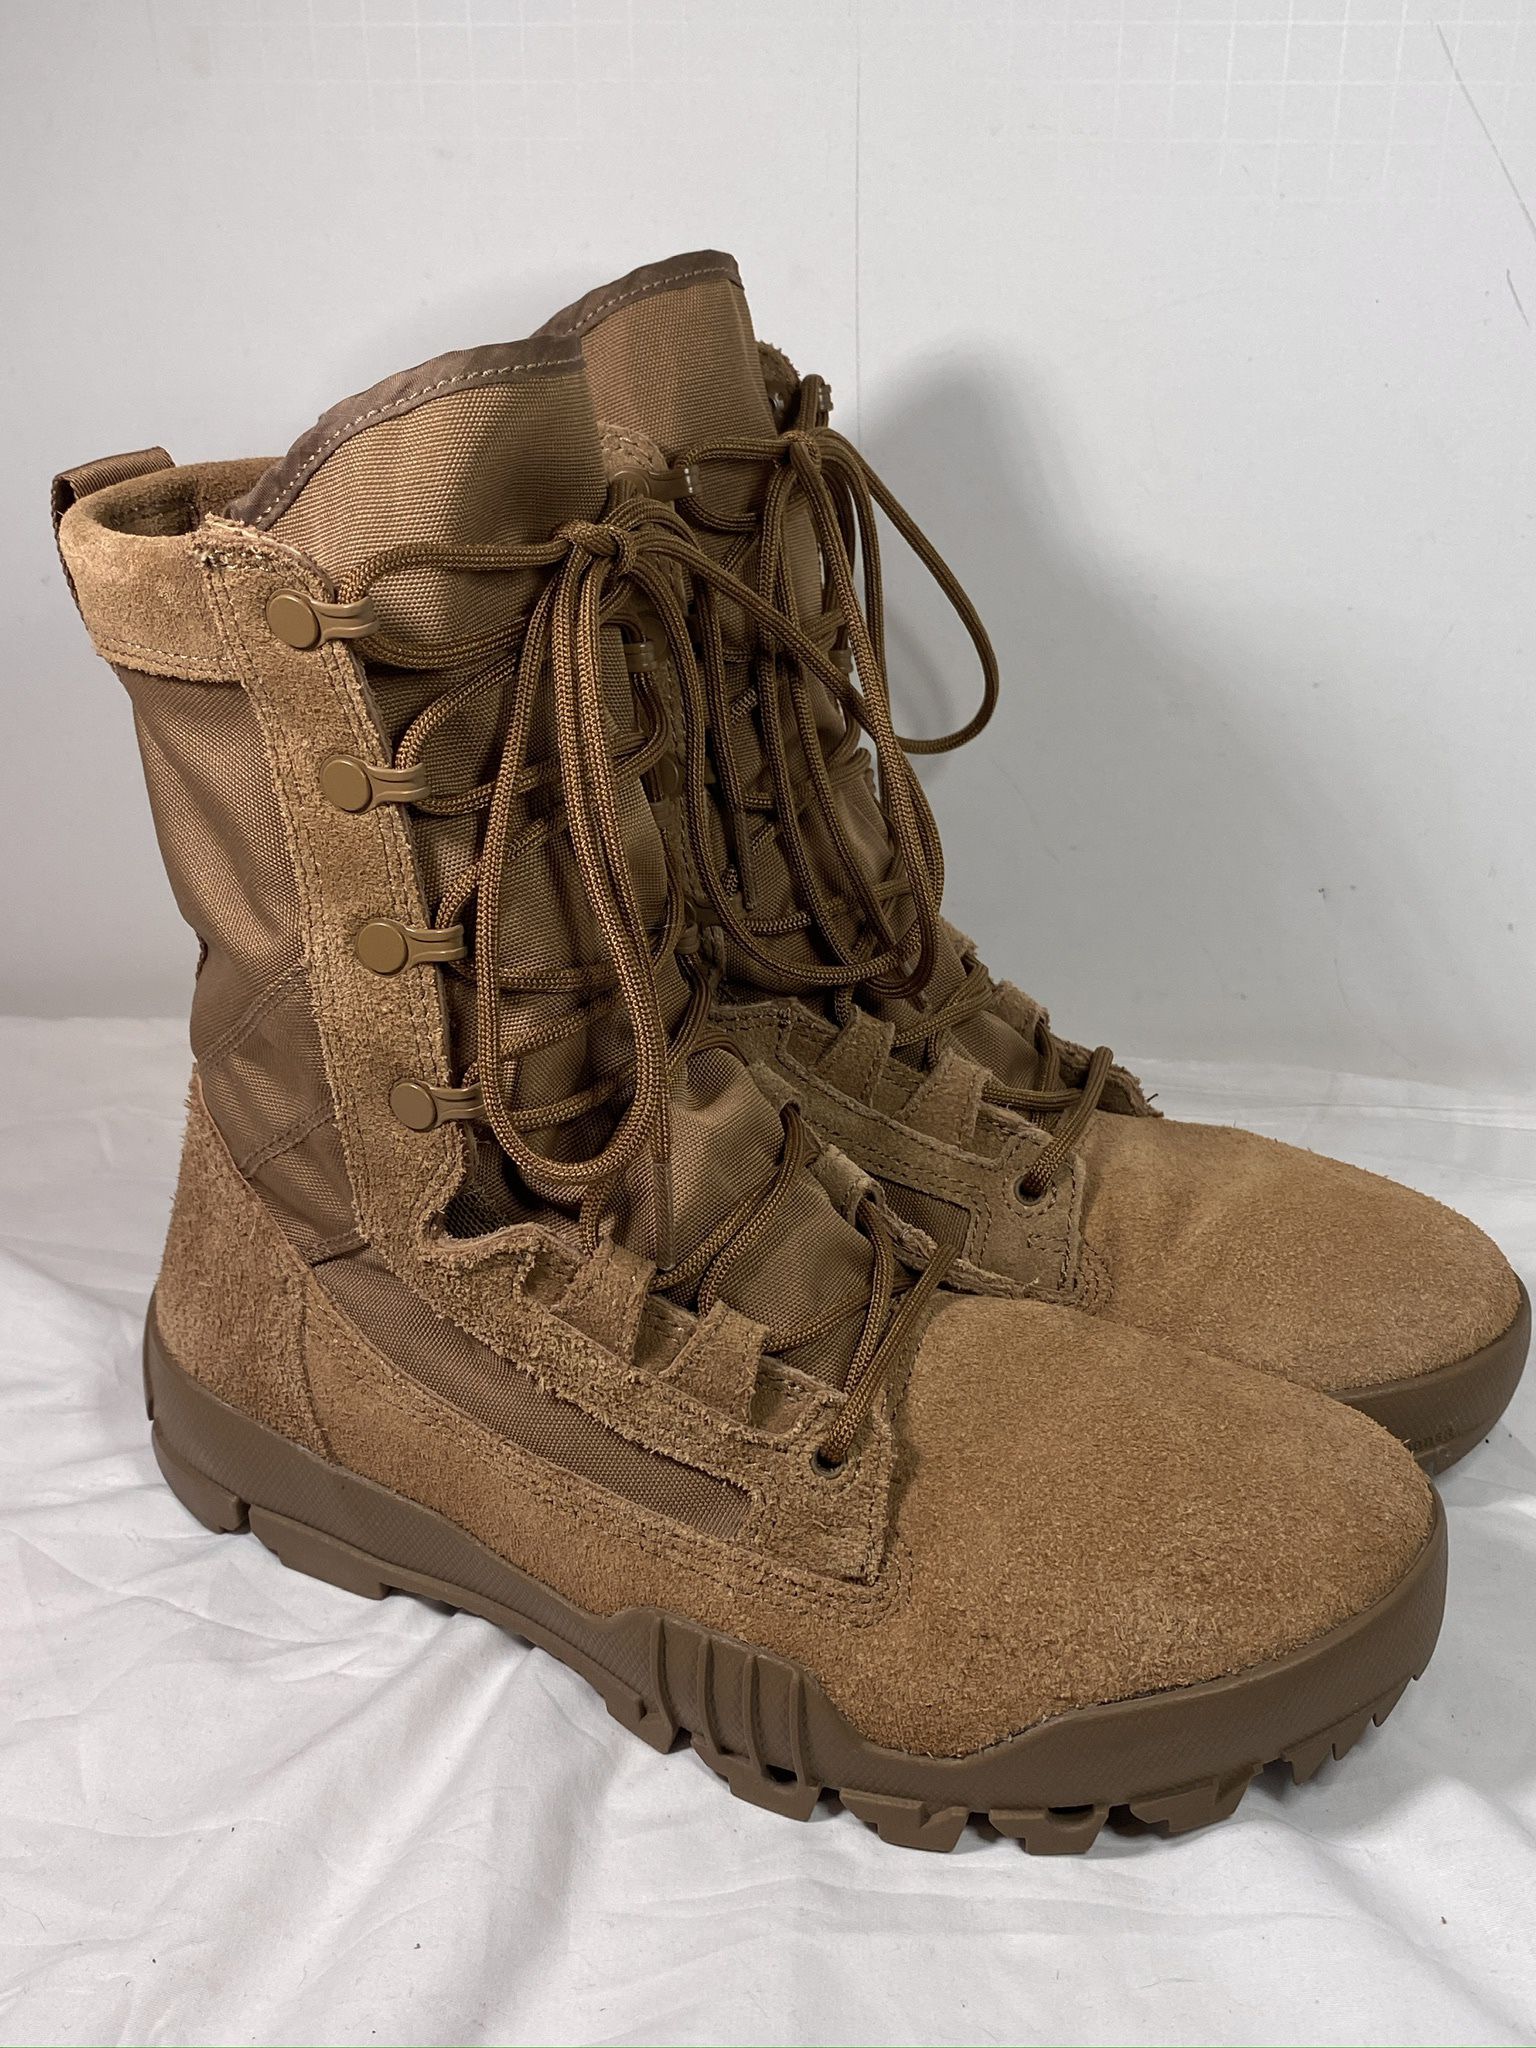 Nike VJ Jungle 8" Leather Coyote Brown 828654-900 Tactical Military Boots sz 6